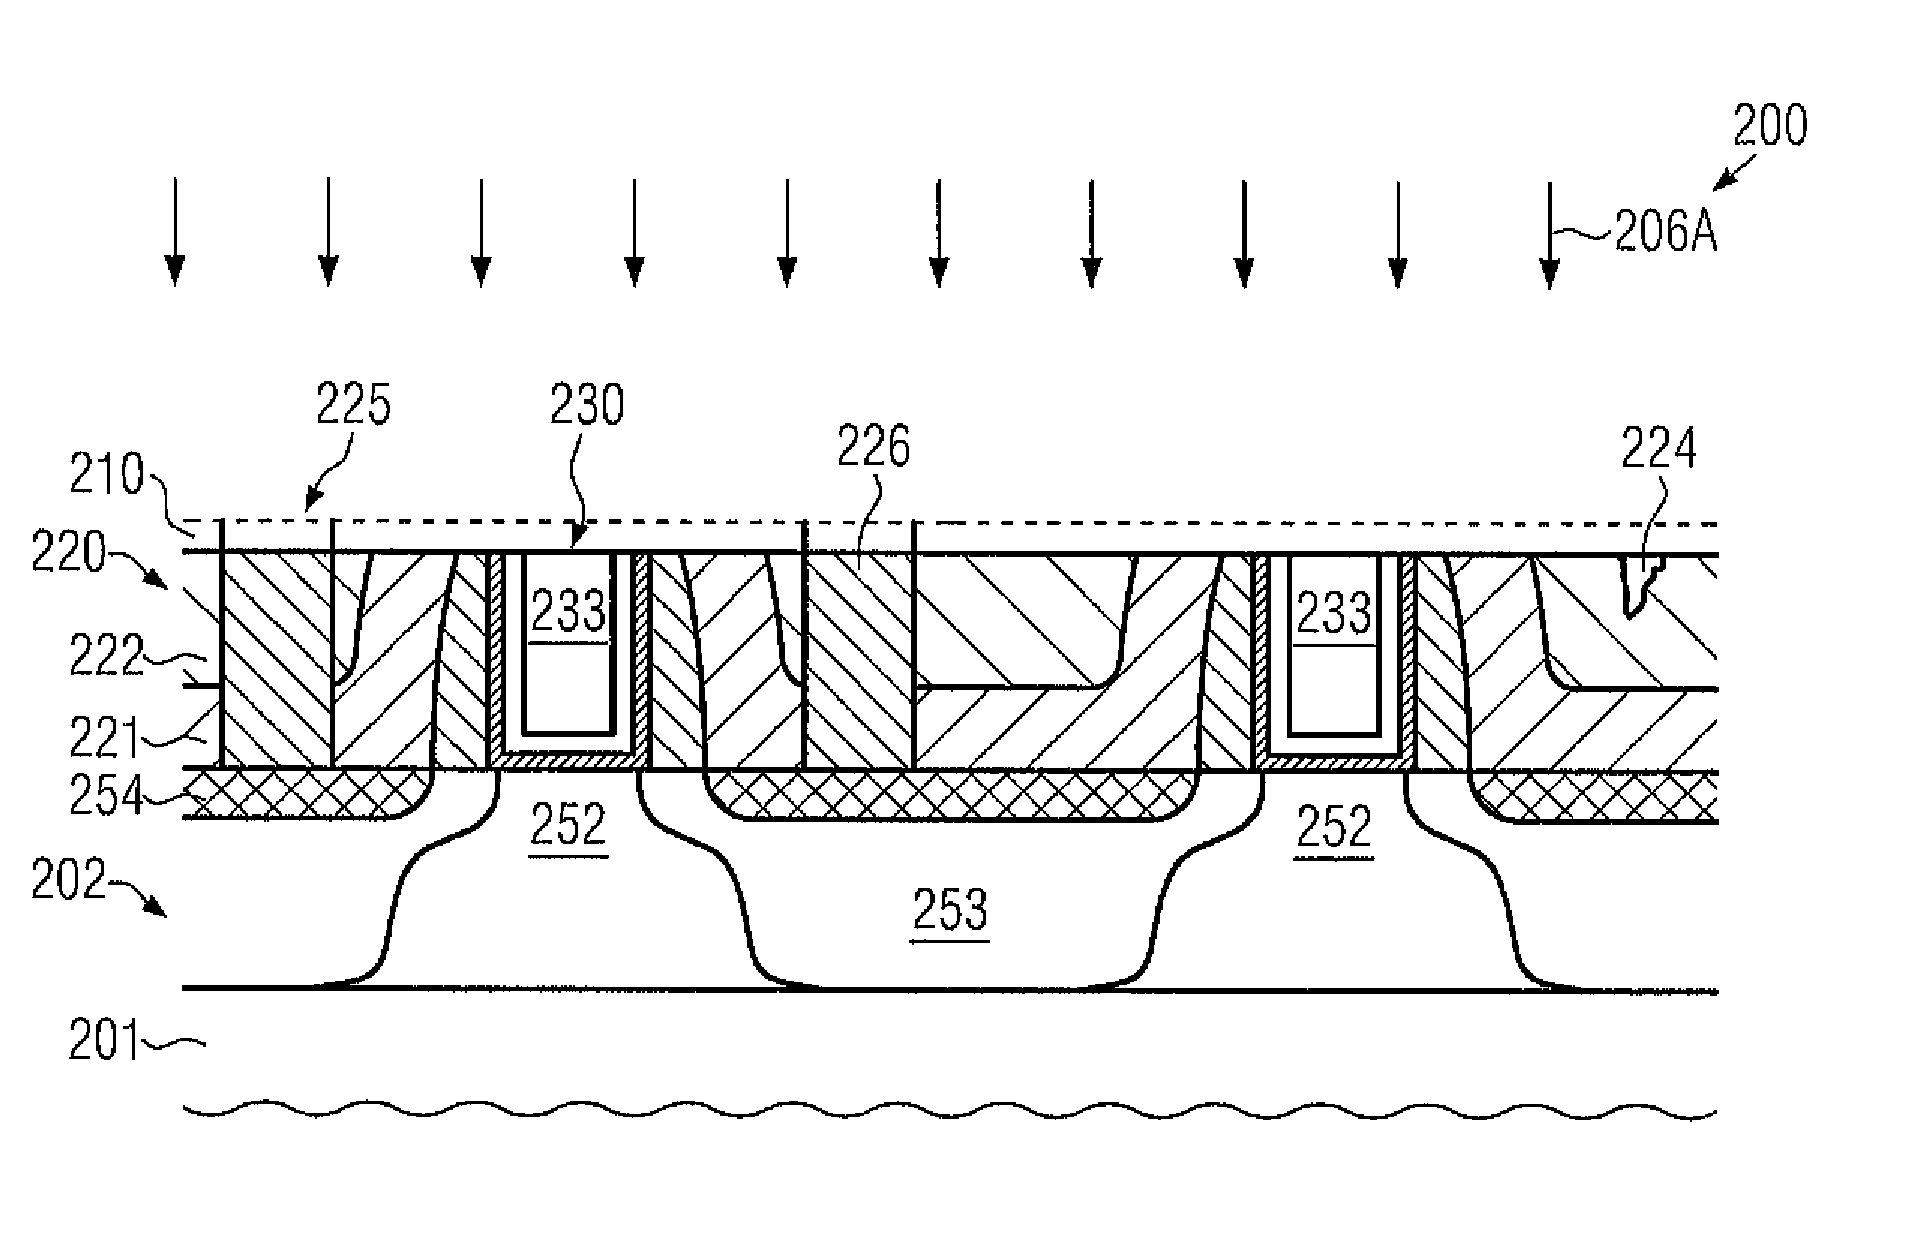 Reduced defectivity in contacts of a semiconductor device comprising replacement gate electrode structures by using an intermediate cap layer